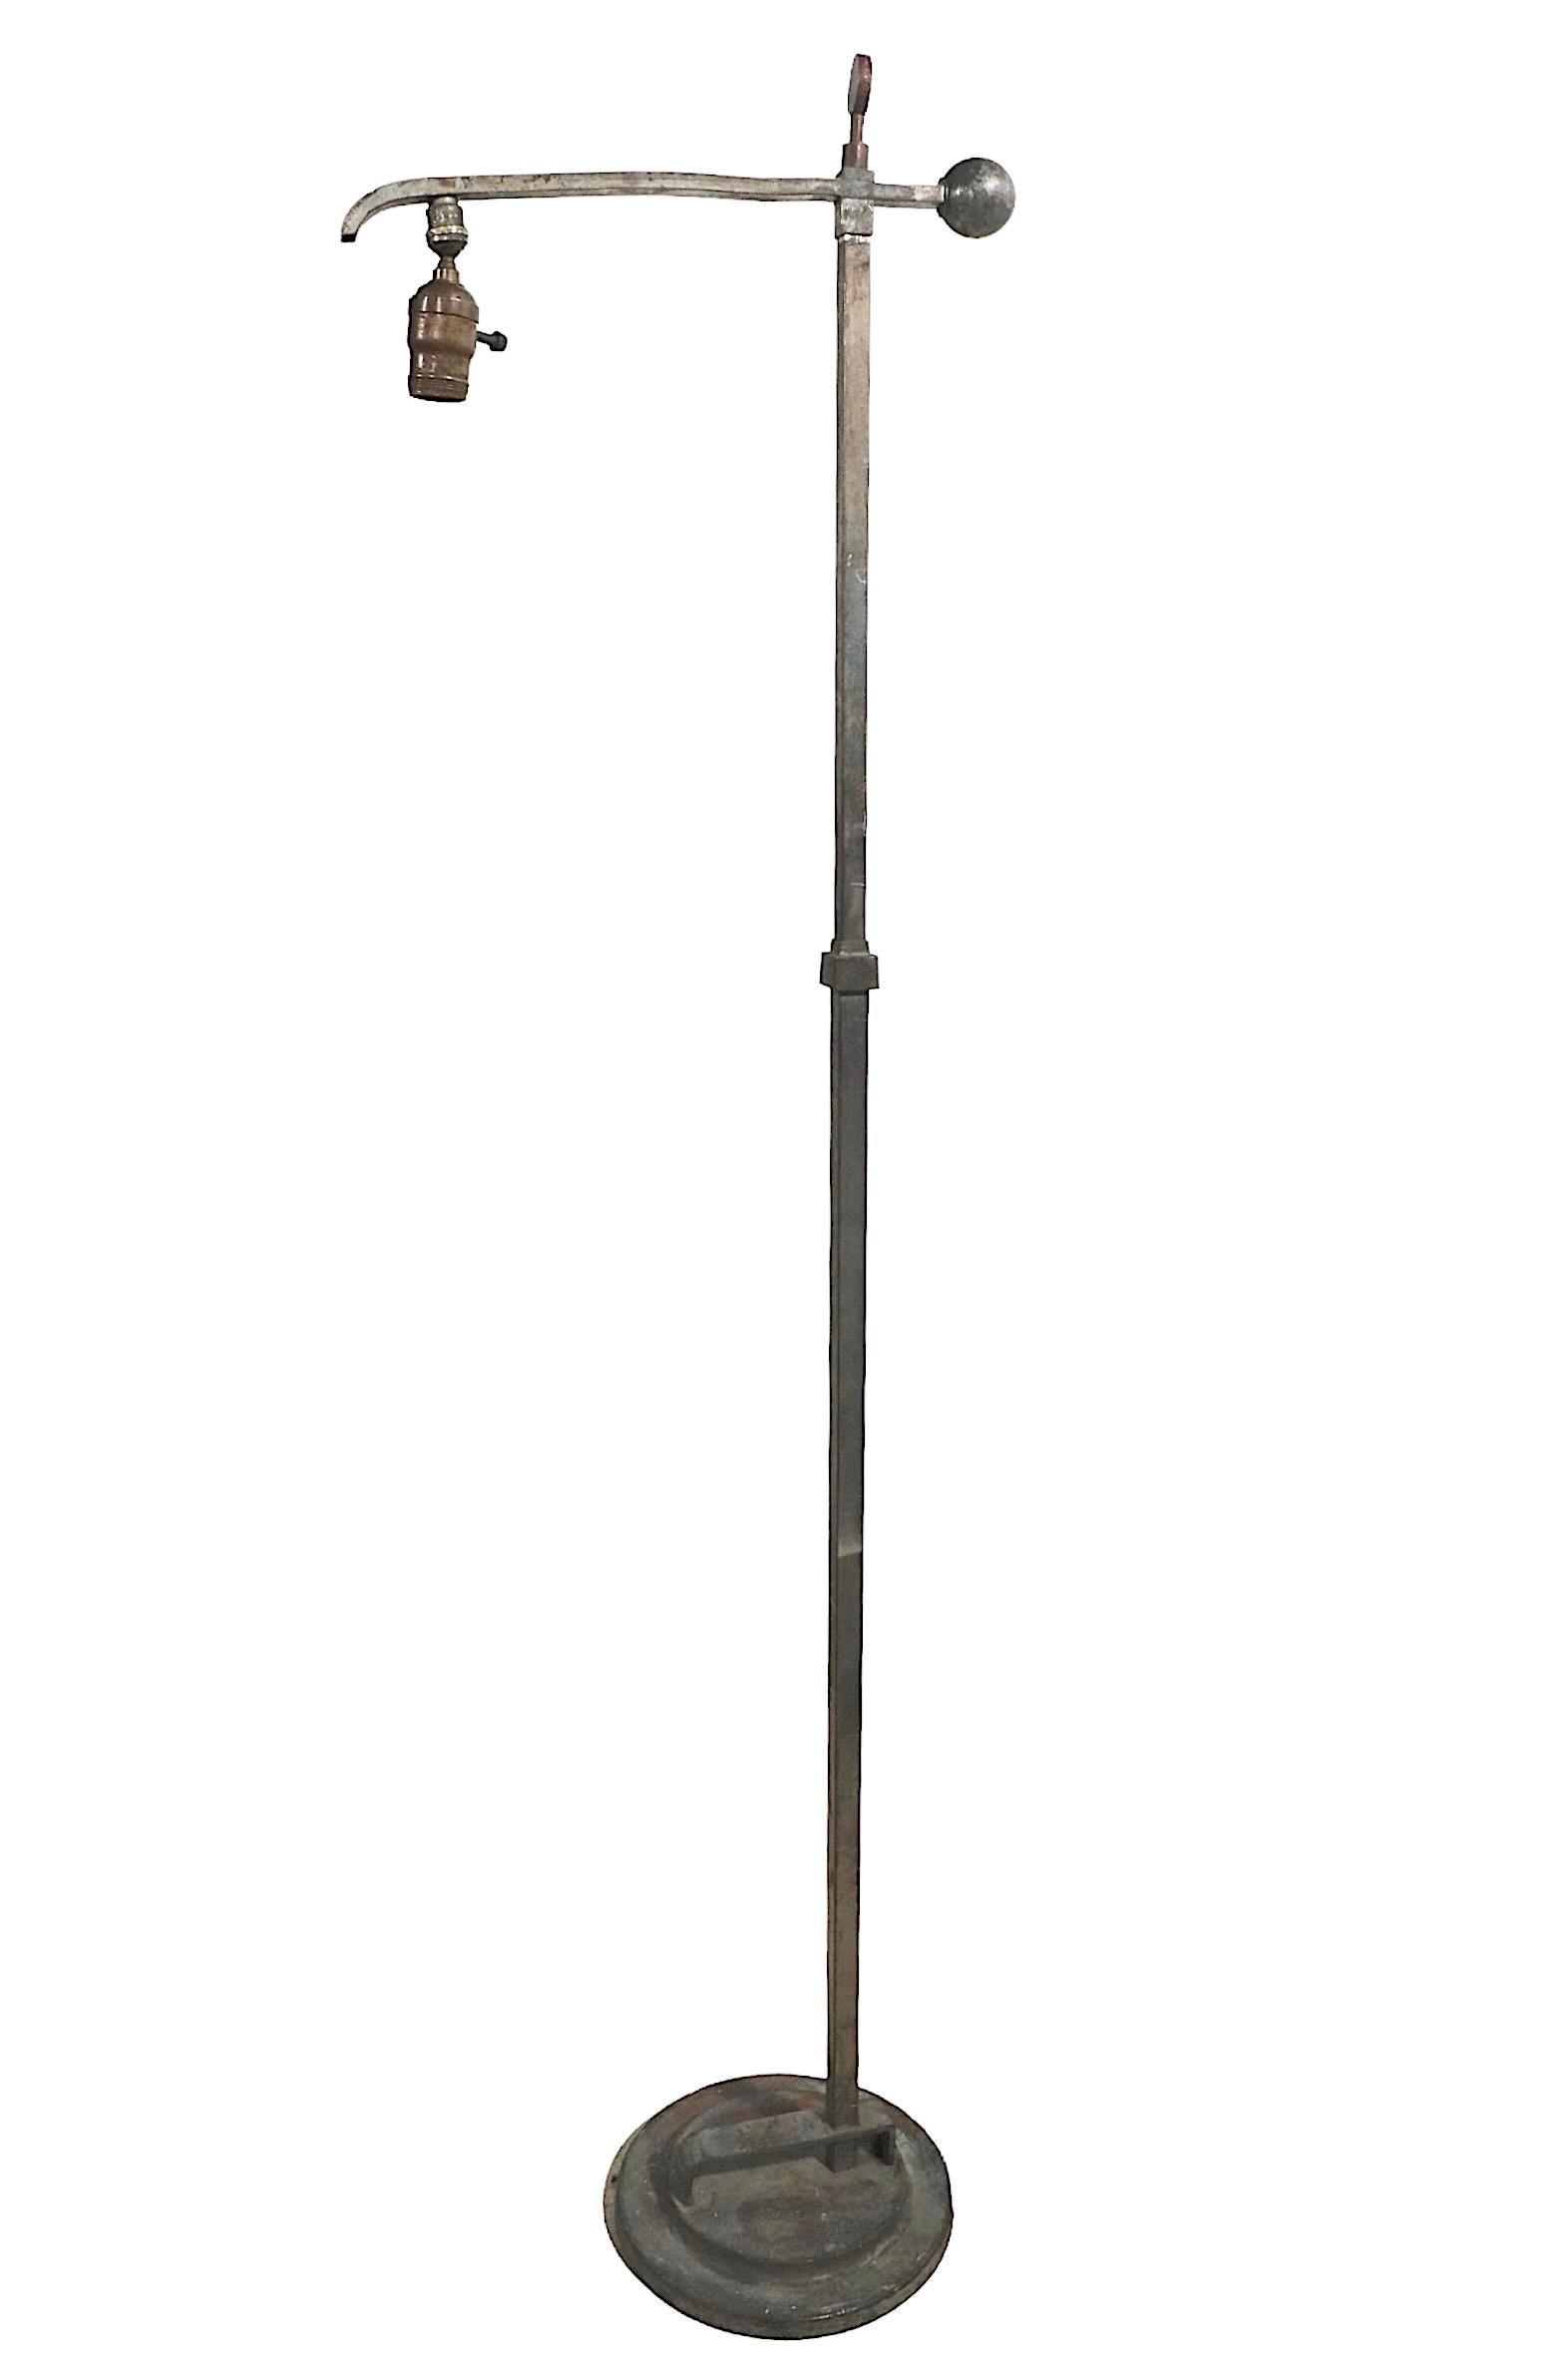 Rare Machine Age floor lamp designed by Donald Deskey for Deskey Vollmer Inc. circa 1930’s. This example shows considerable wear to the finish, a slight dent in the arm element, and general signs of age and use, it is selling in as found condition.